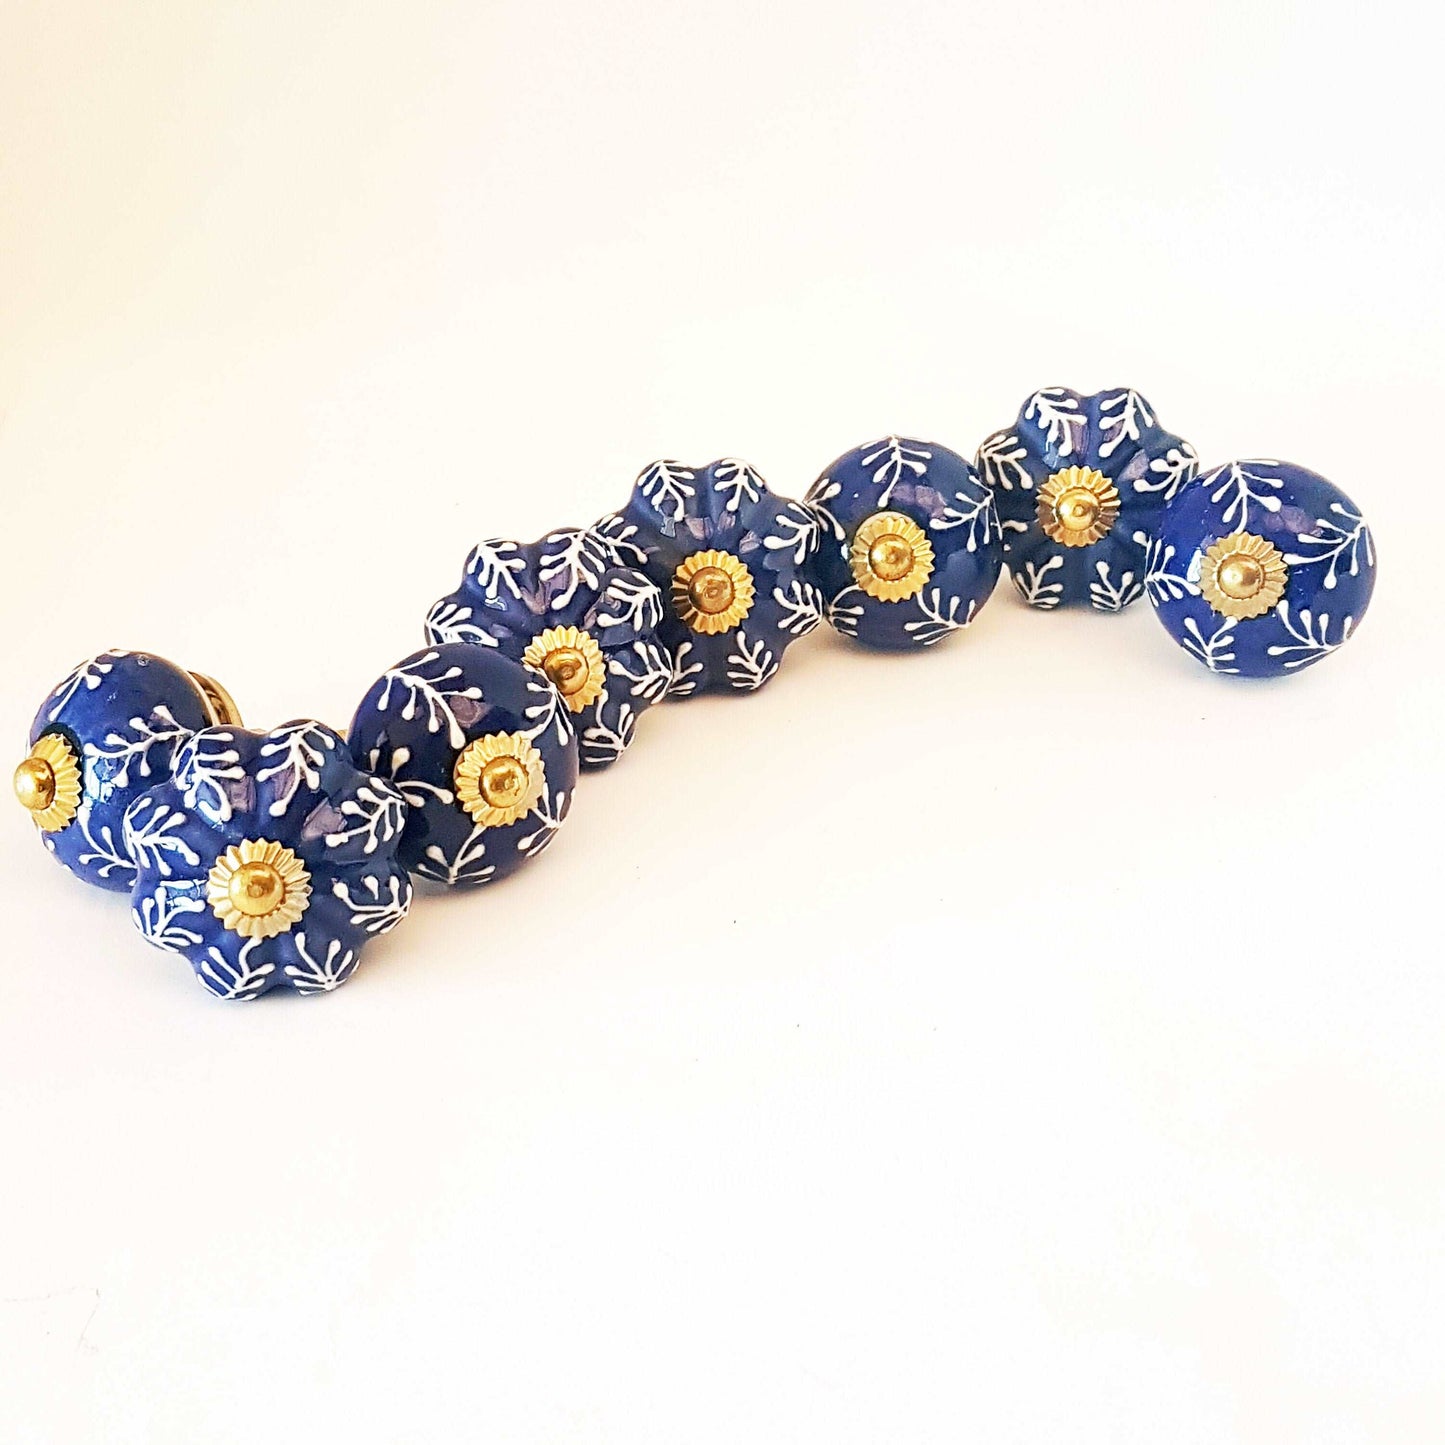 8 Delft cabinet knob drawer pulls in cobalt blue & white hand painted embossed designs. Exclusive Regal Gold  8 piece decorator collection. - Vintage India Ca